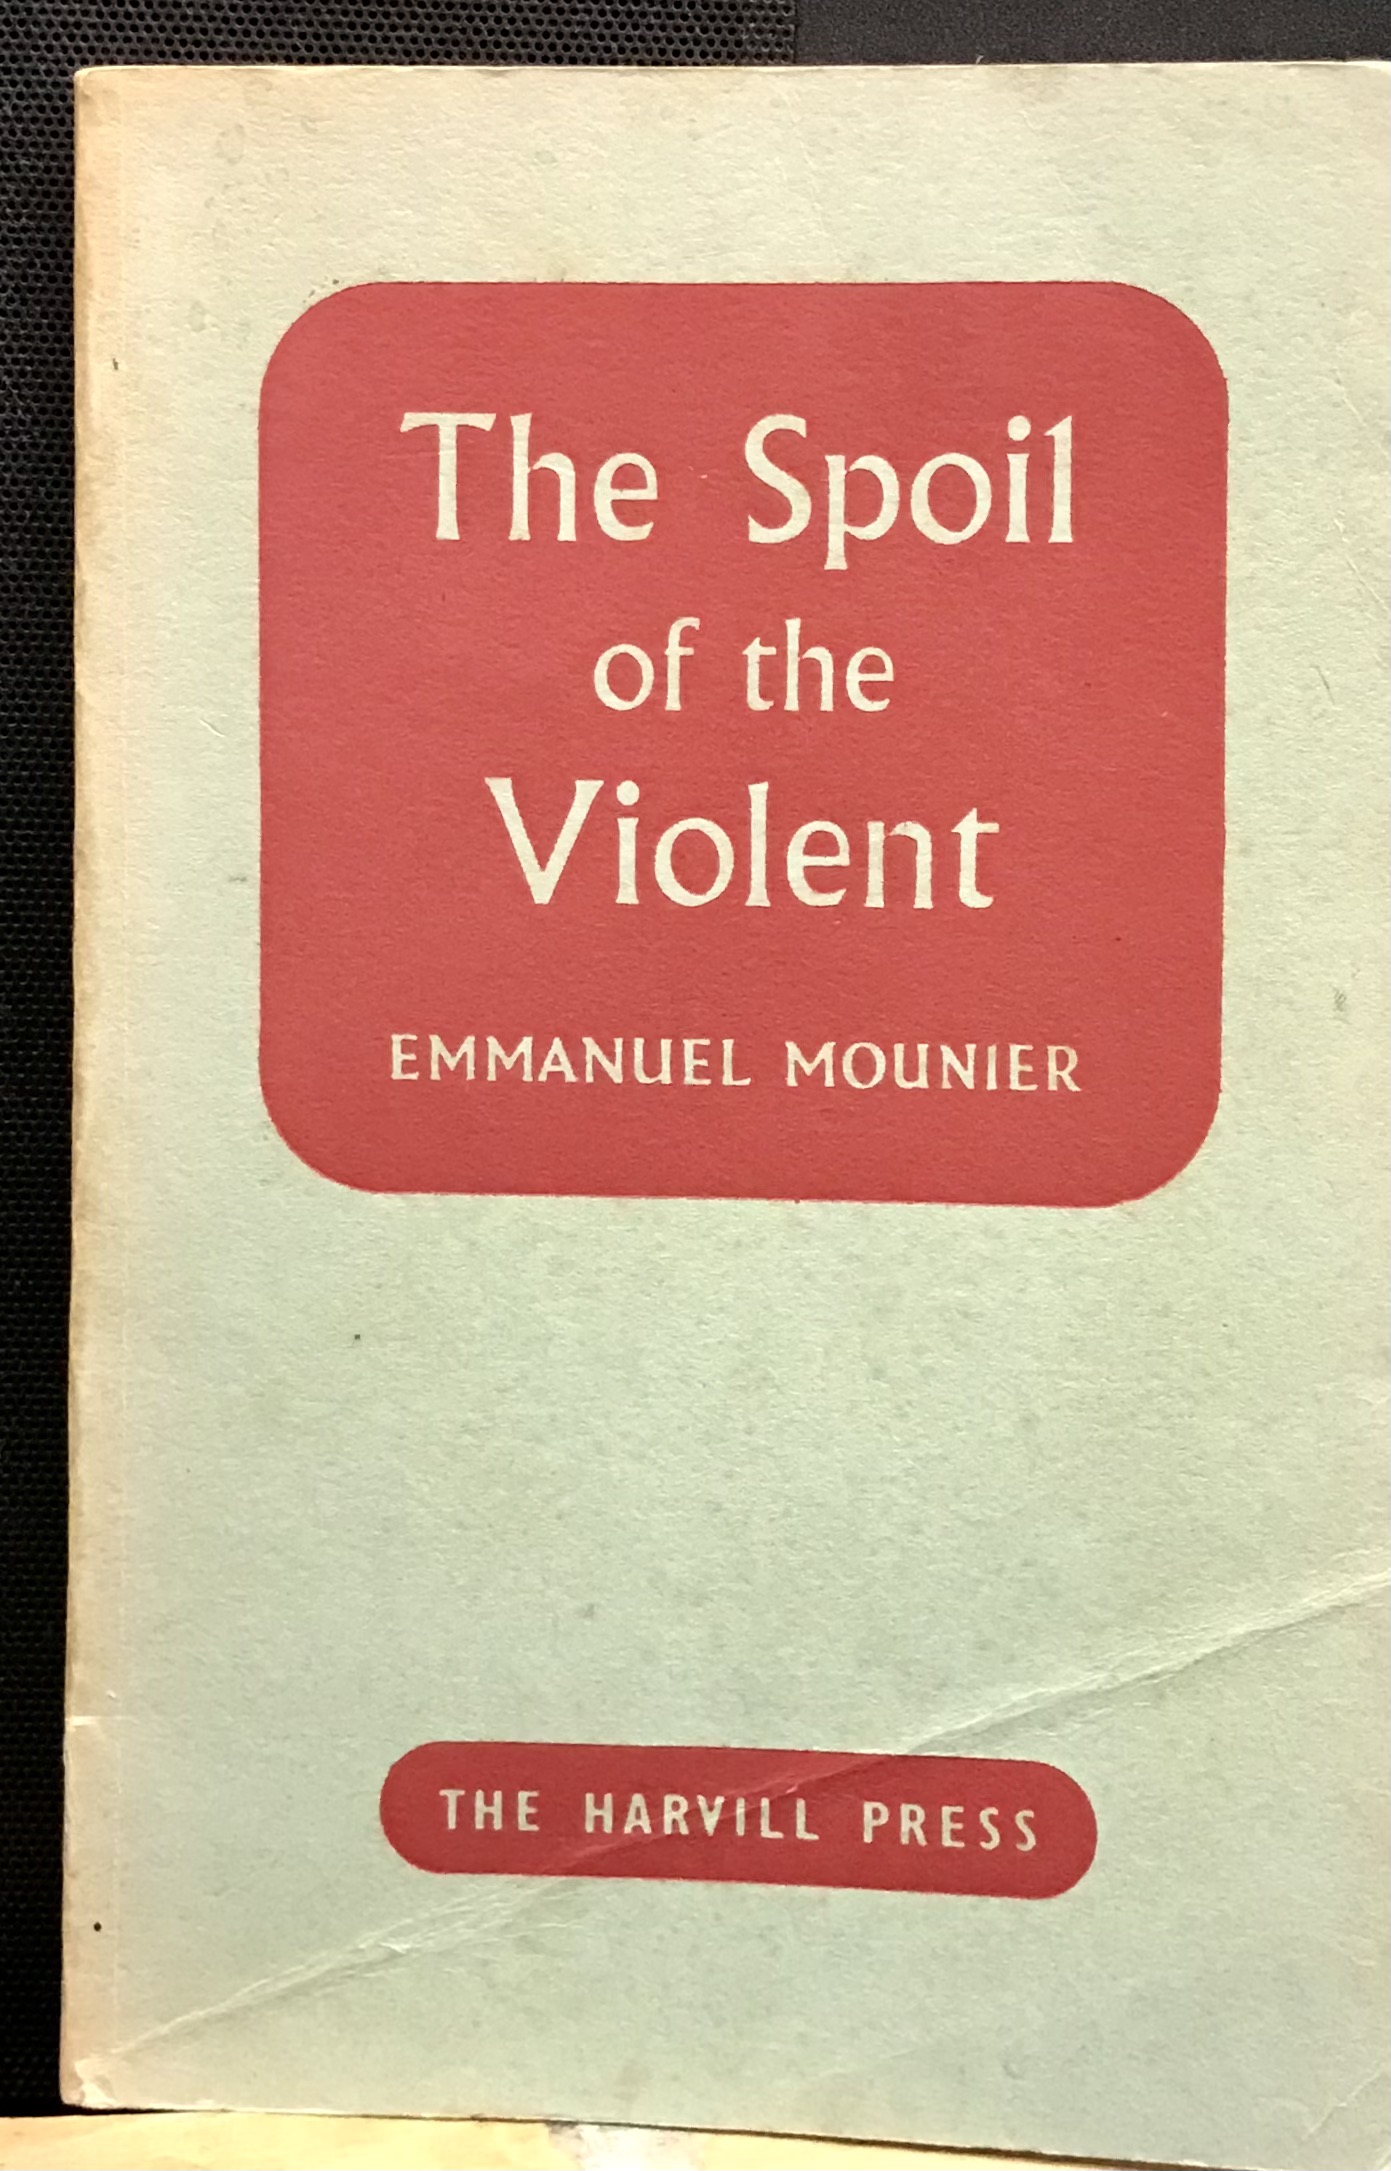 The Spoil of the Violent